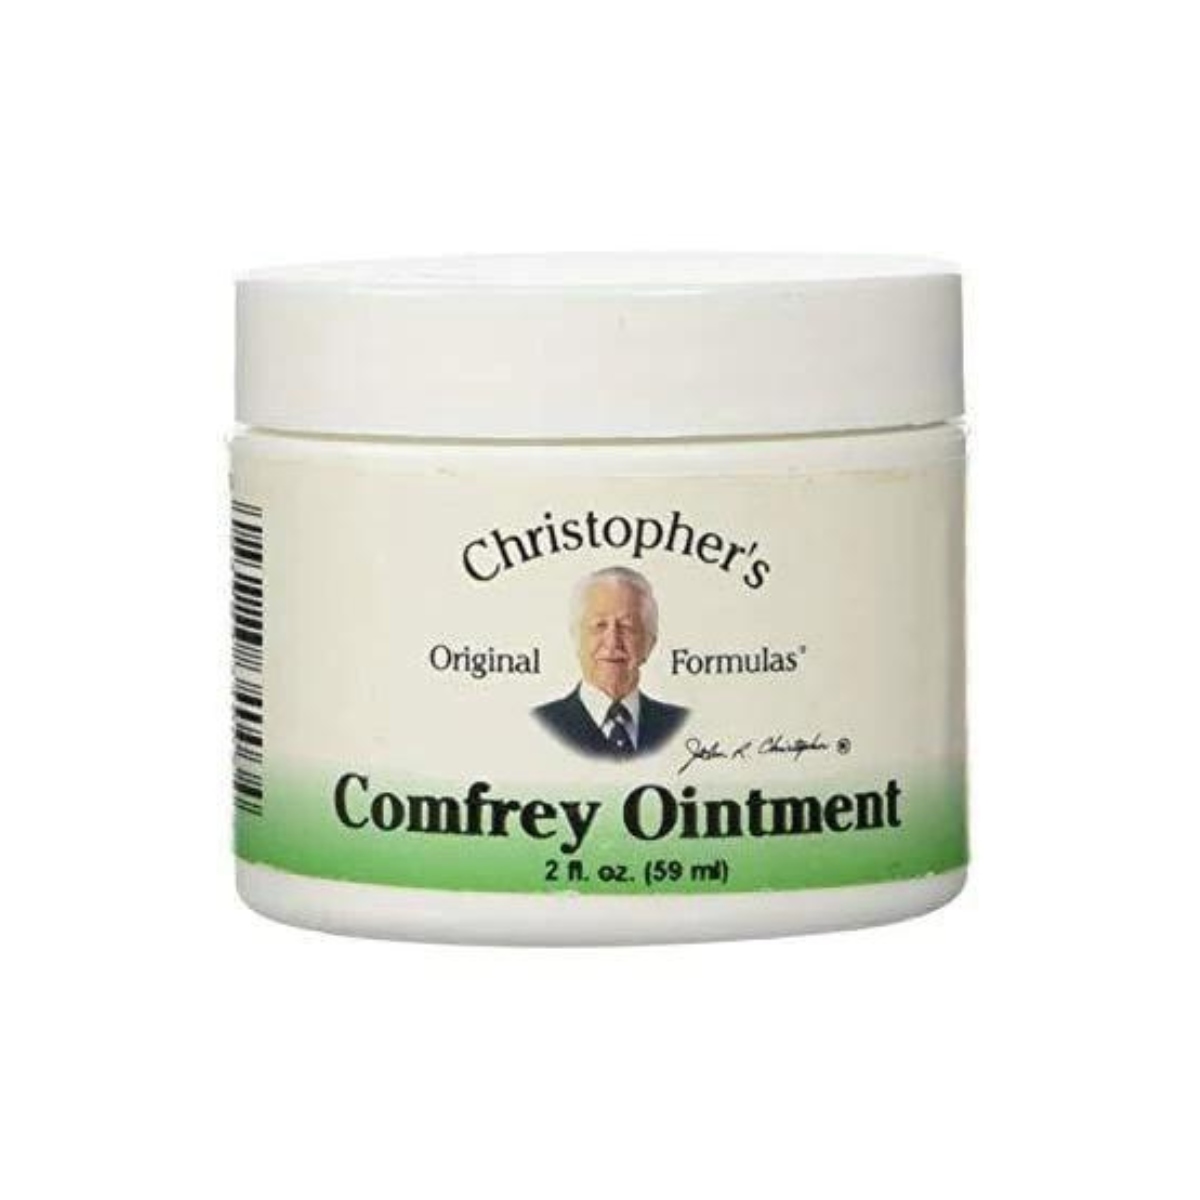 Comfrey Ointment / Smoothe Skin